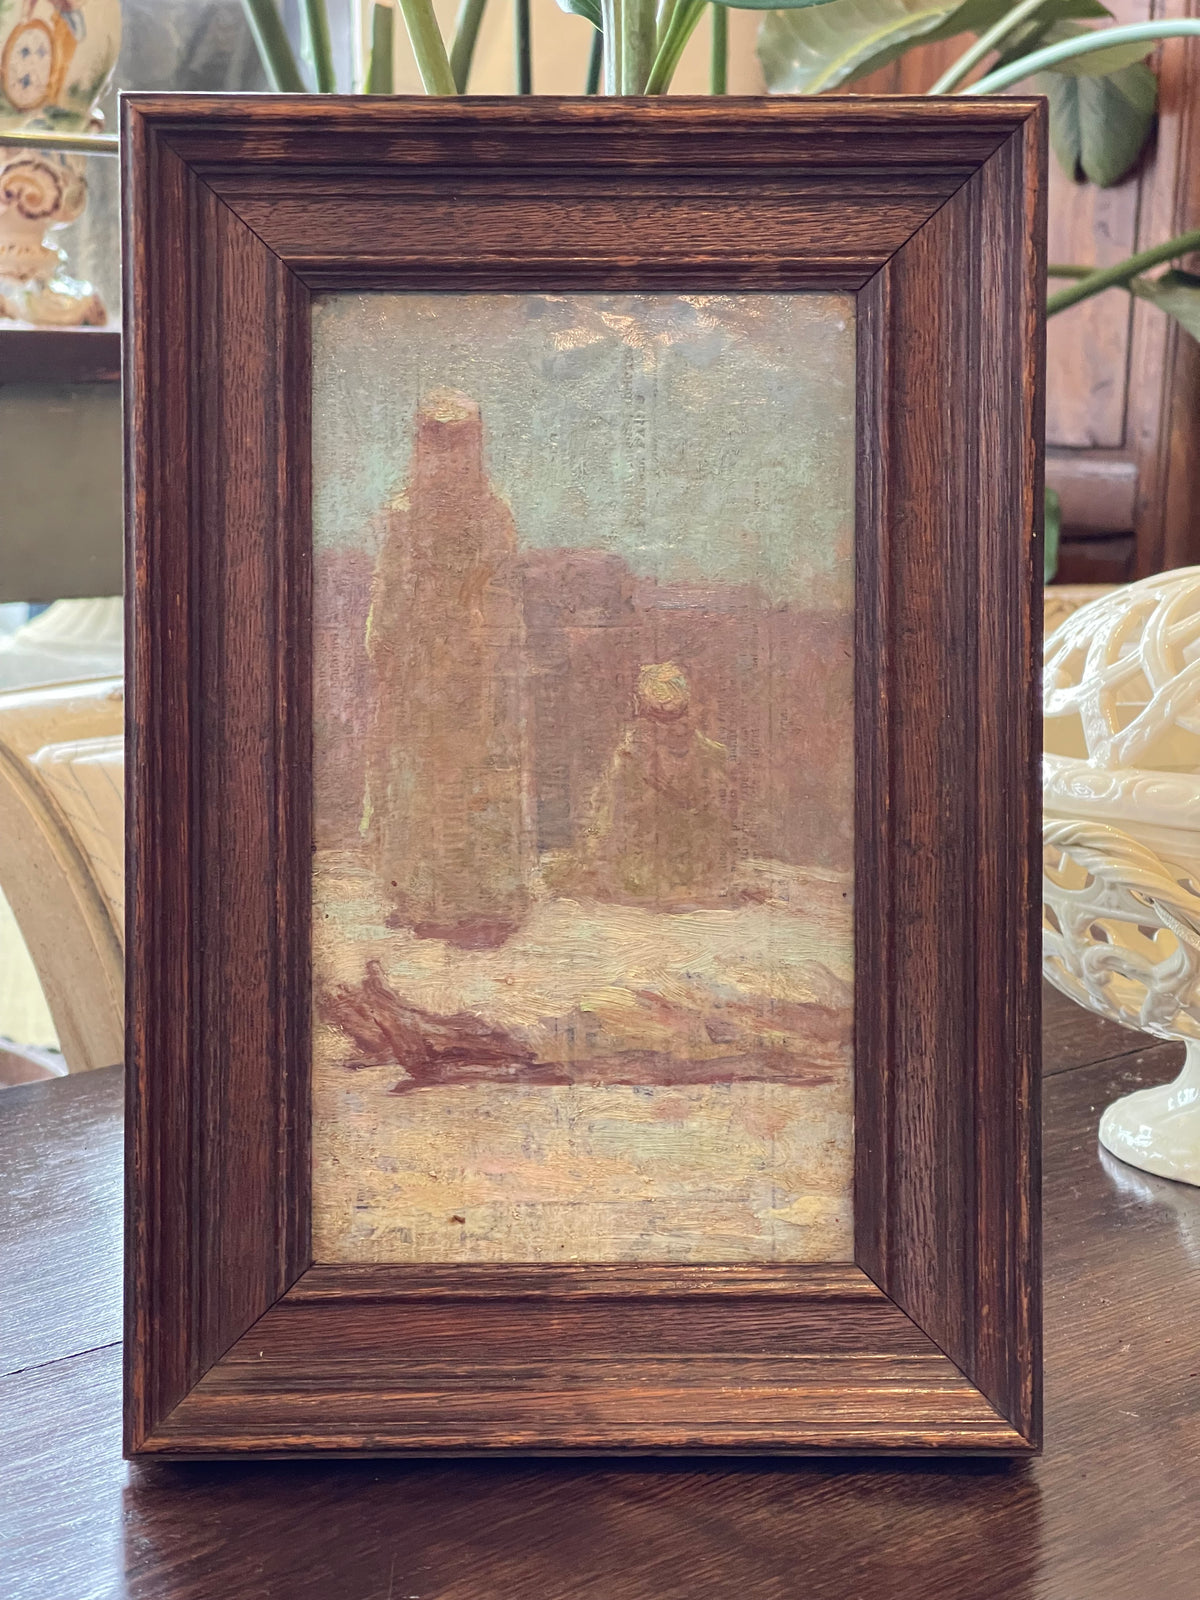 FRAMED FRENCH OIL ON PAPER LAID ON BOARD BY MARIUS PERRET (1853-1900)